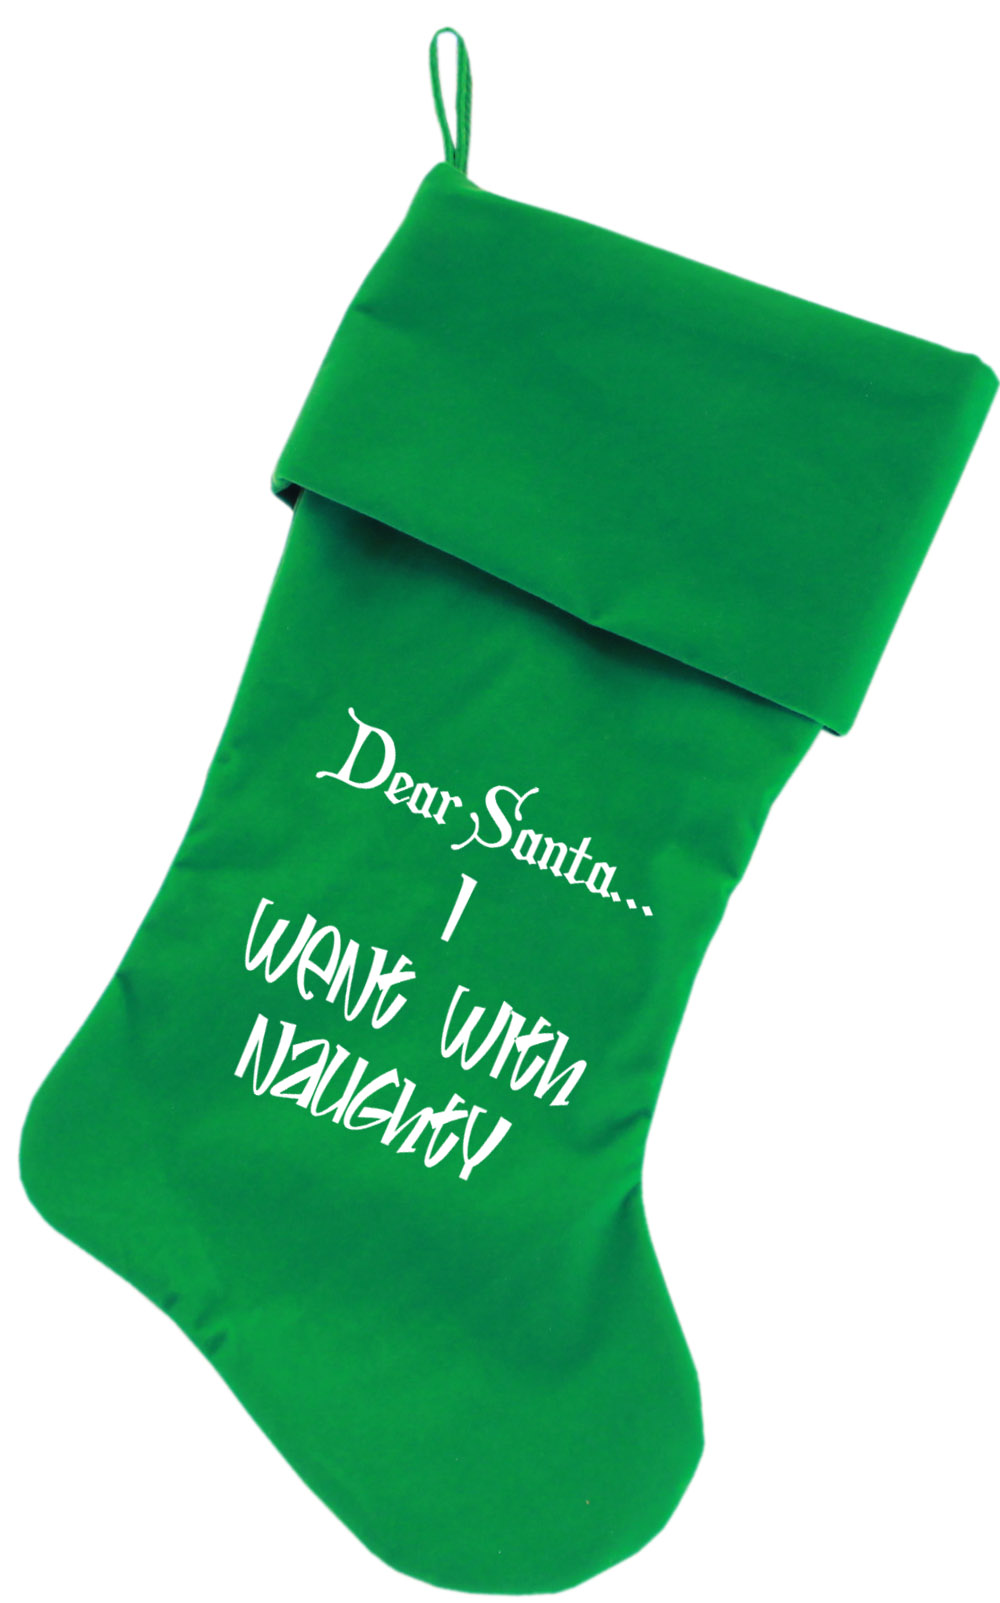 Went with Naughty Screen Print 18 inch Velvet Christmas Stocking Green